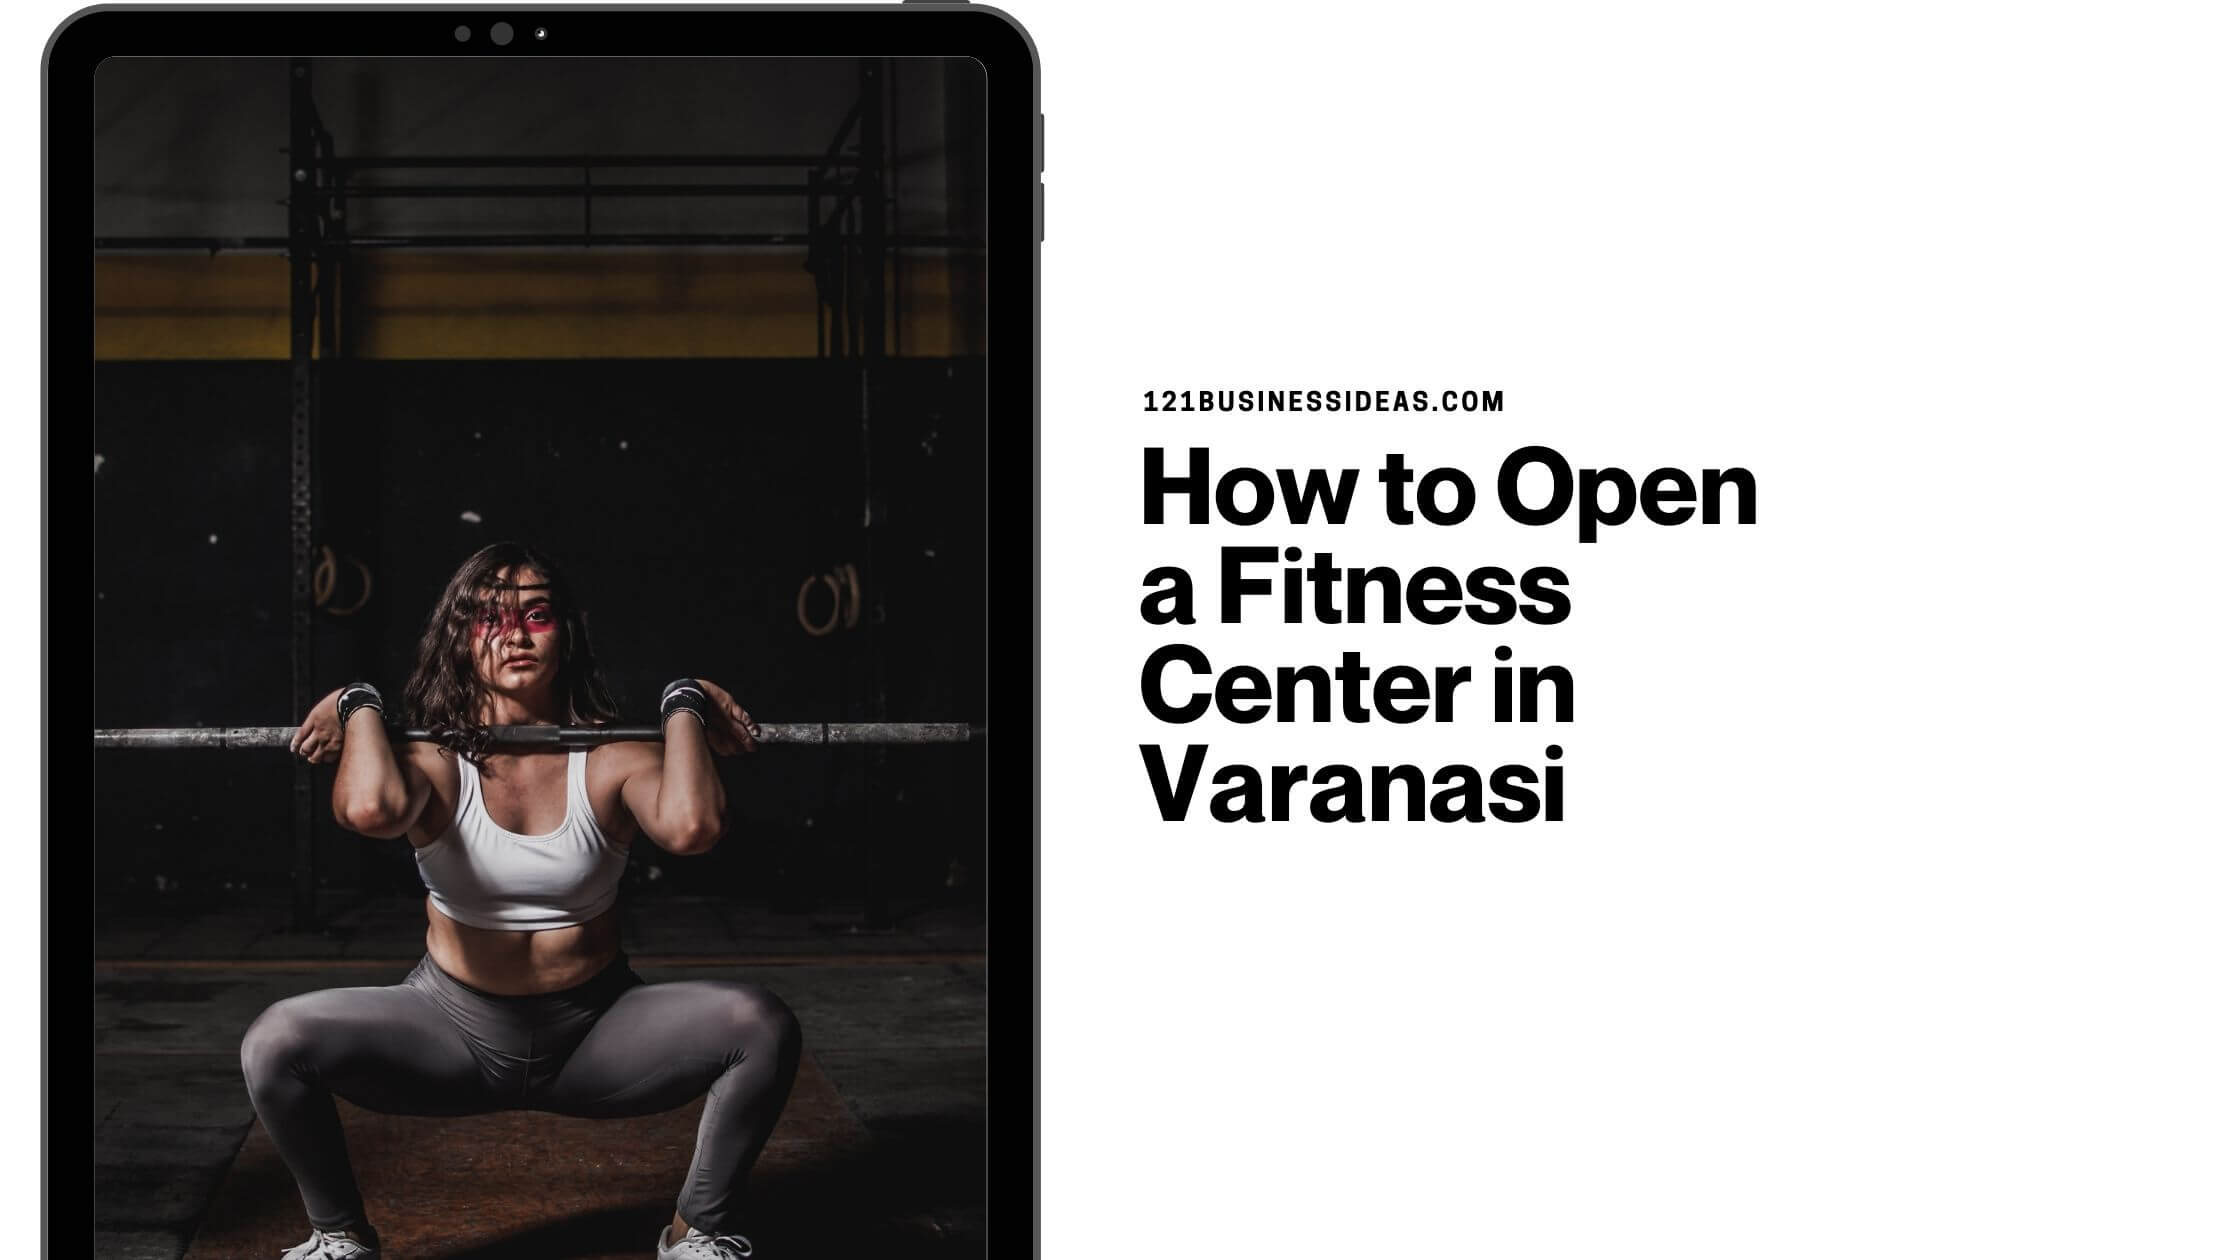 How to Open a Fitness Center in Varanasi (1)